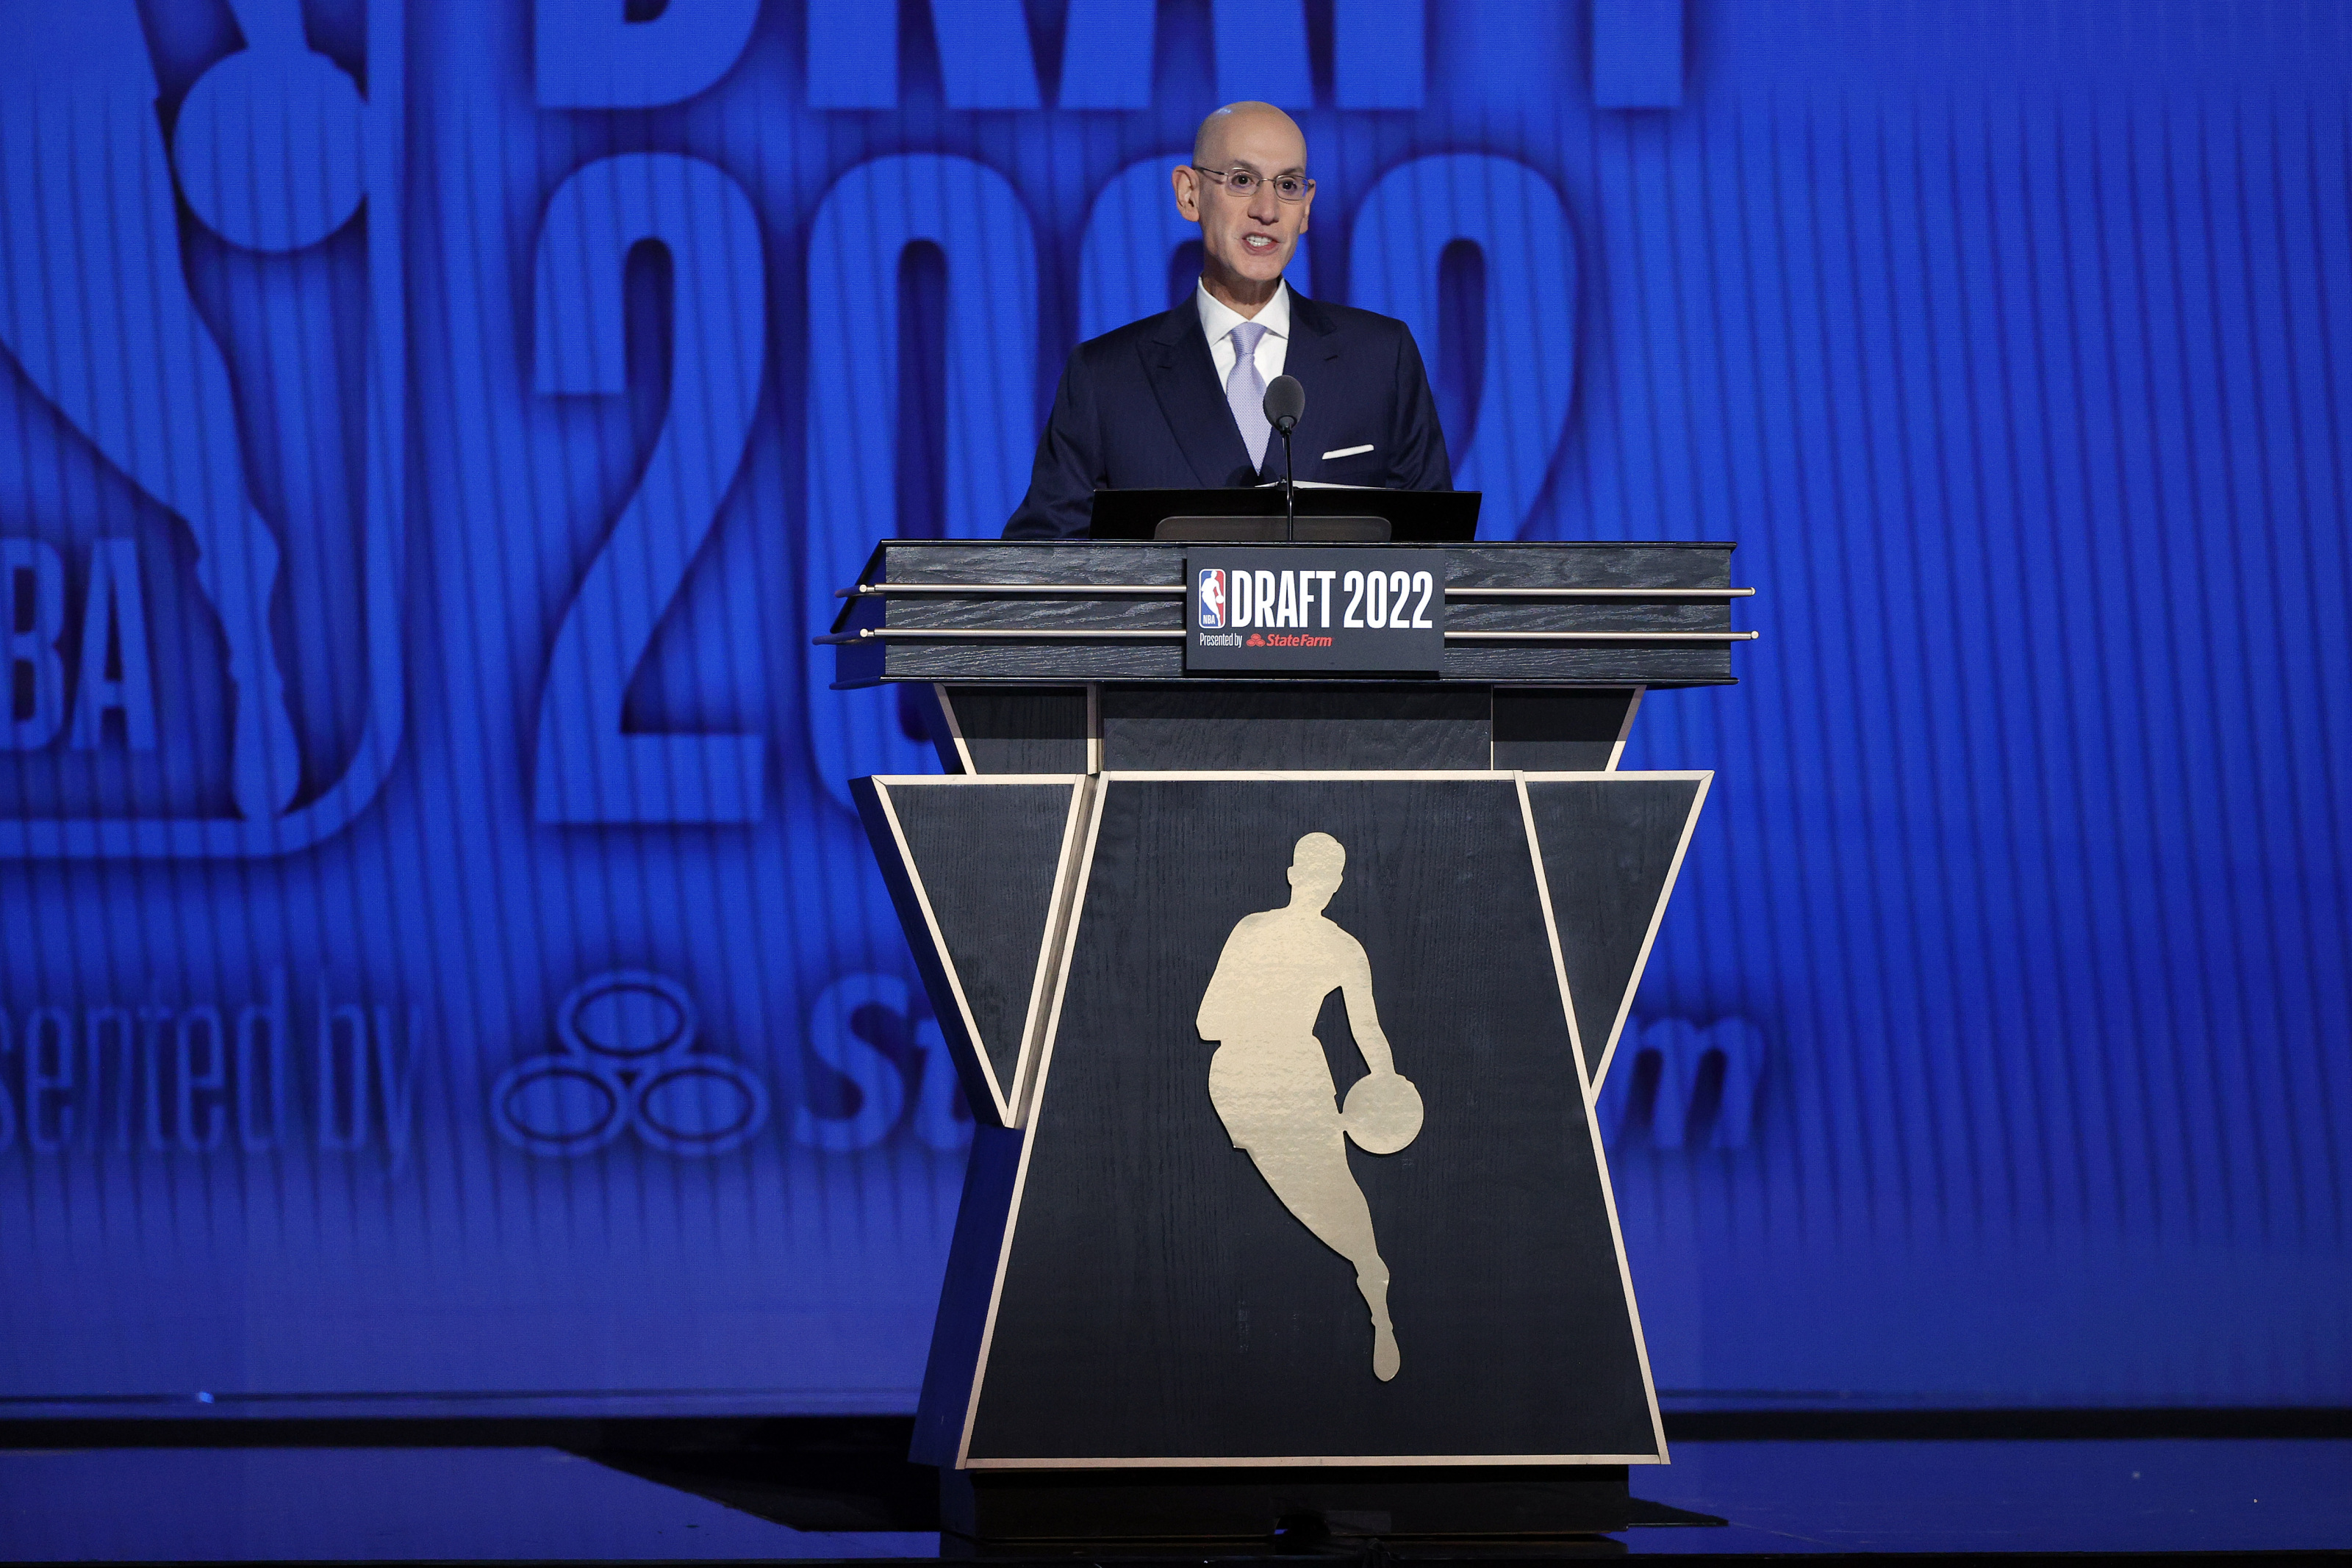 Future NBA Draft Locations for 2024, 2025 and beyond